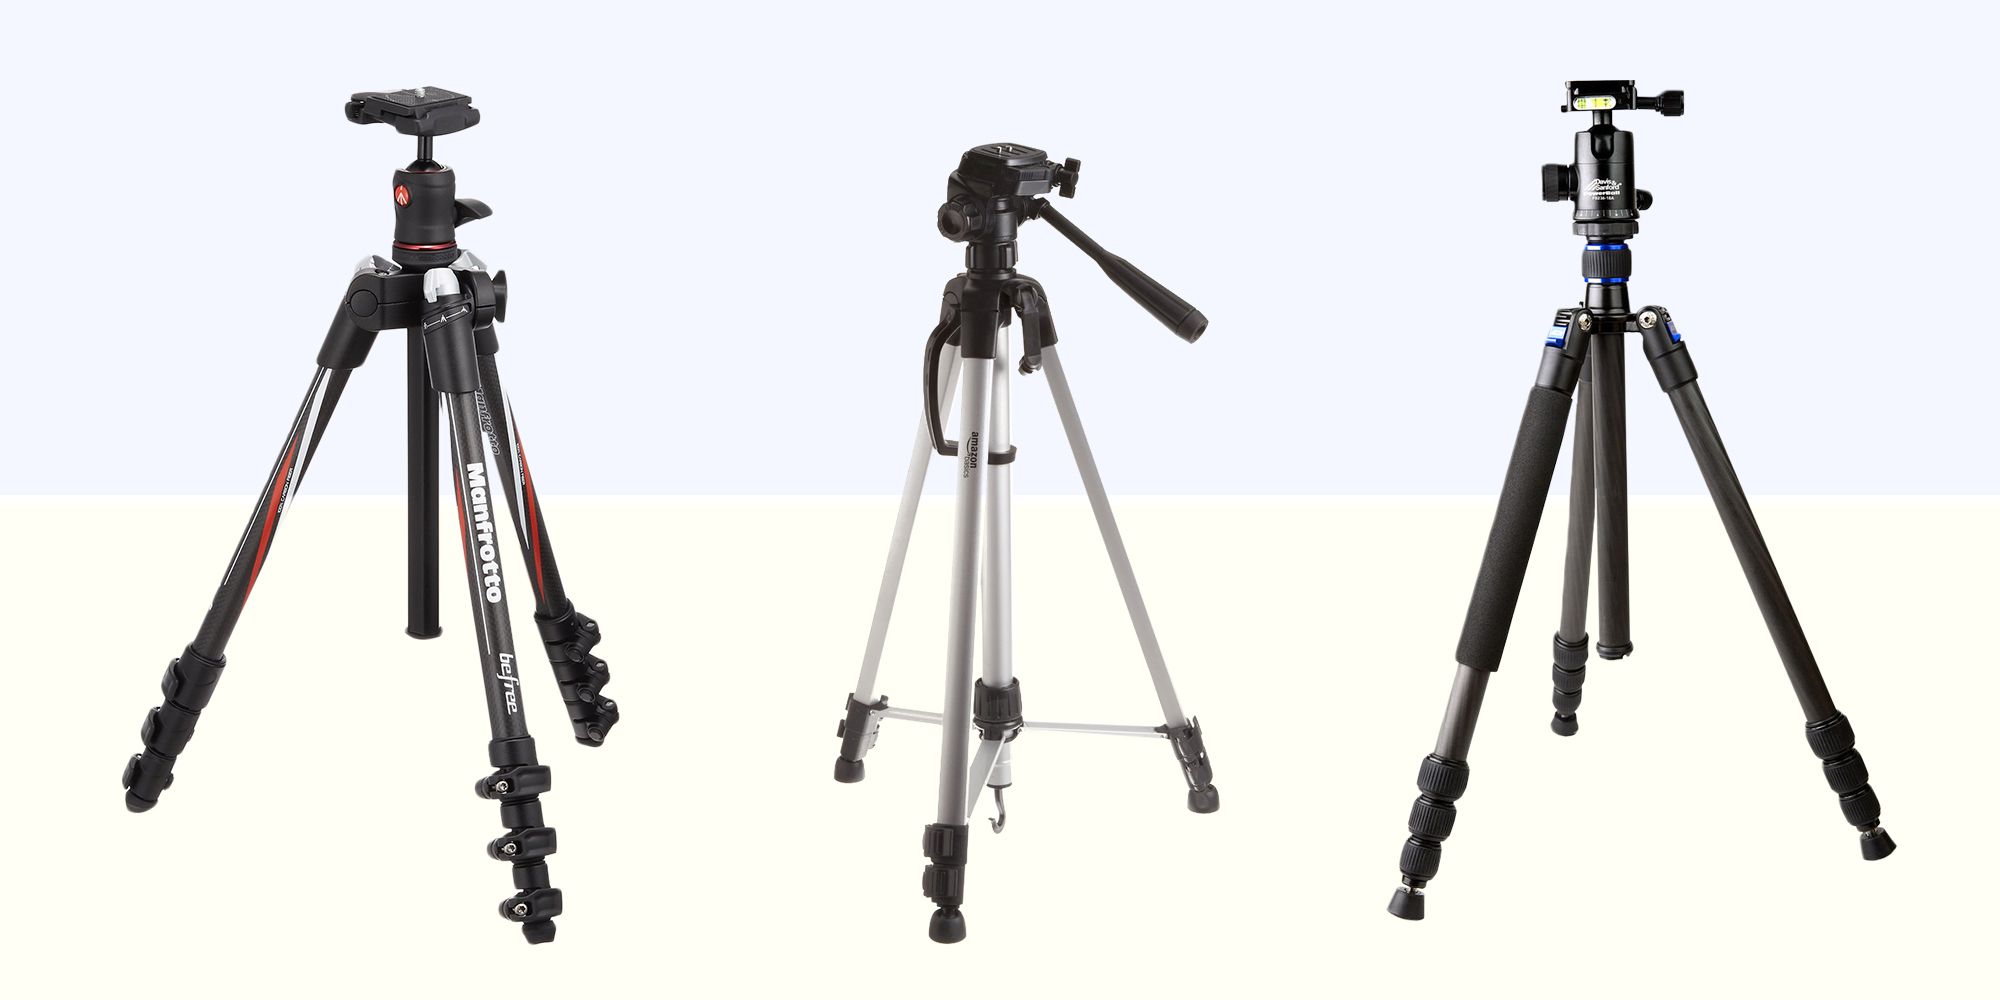 Sony HDR-TD10 Camcorder Tripod Folding Table-Top Tripod for Compact Digital Cameras and Camcorders Approx 5 H